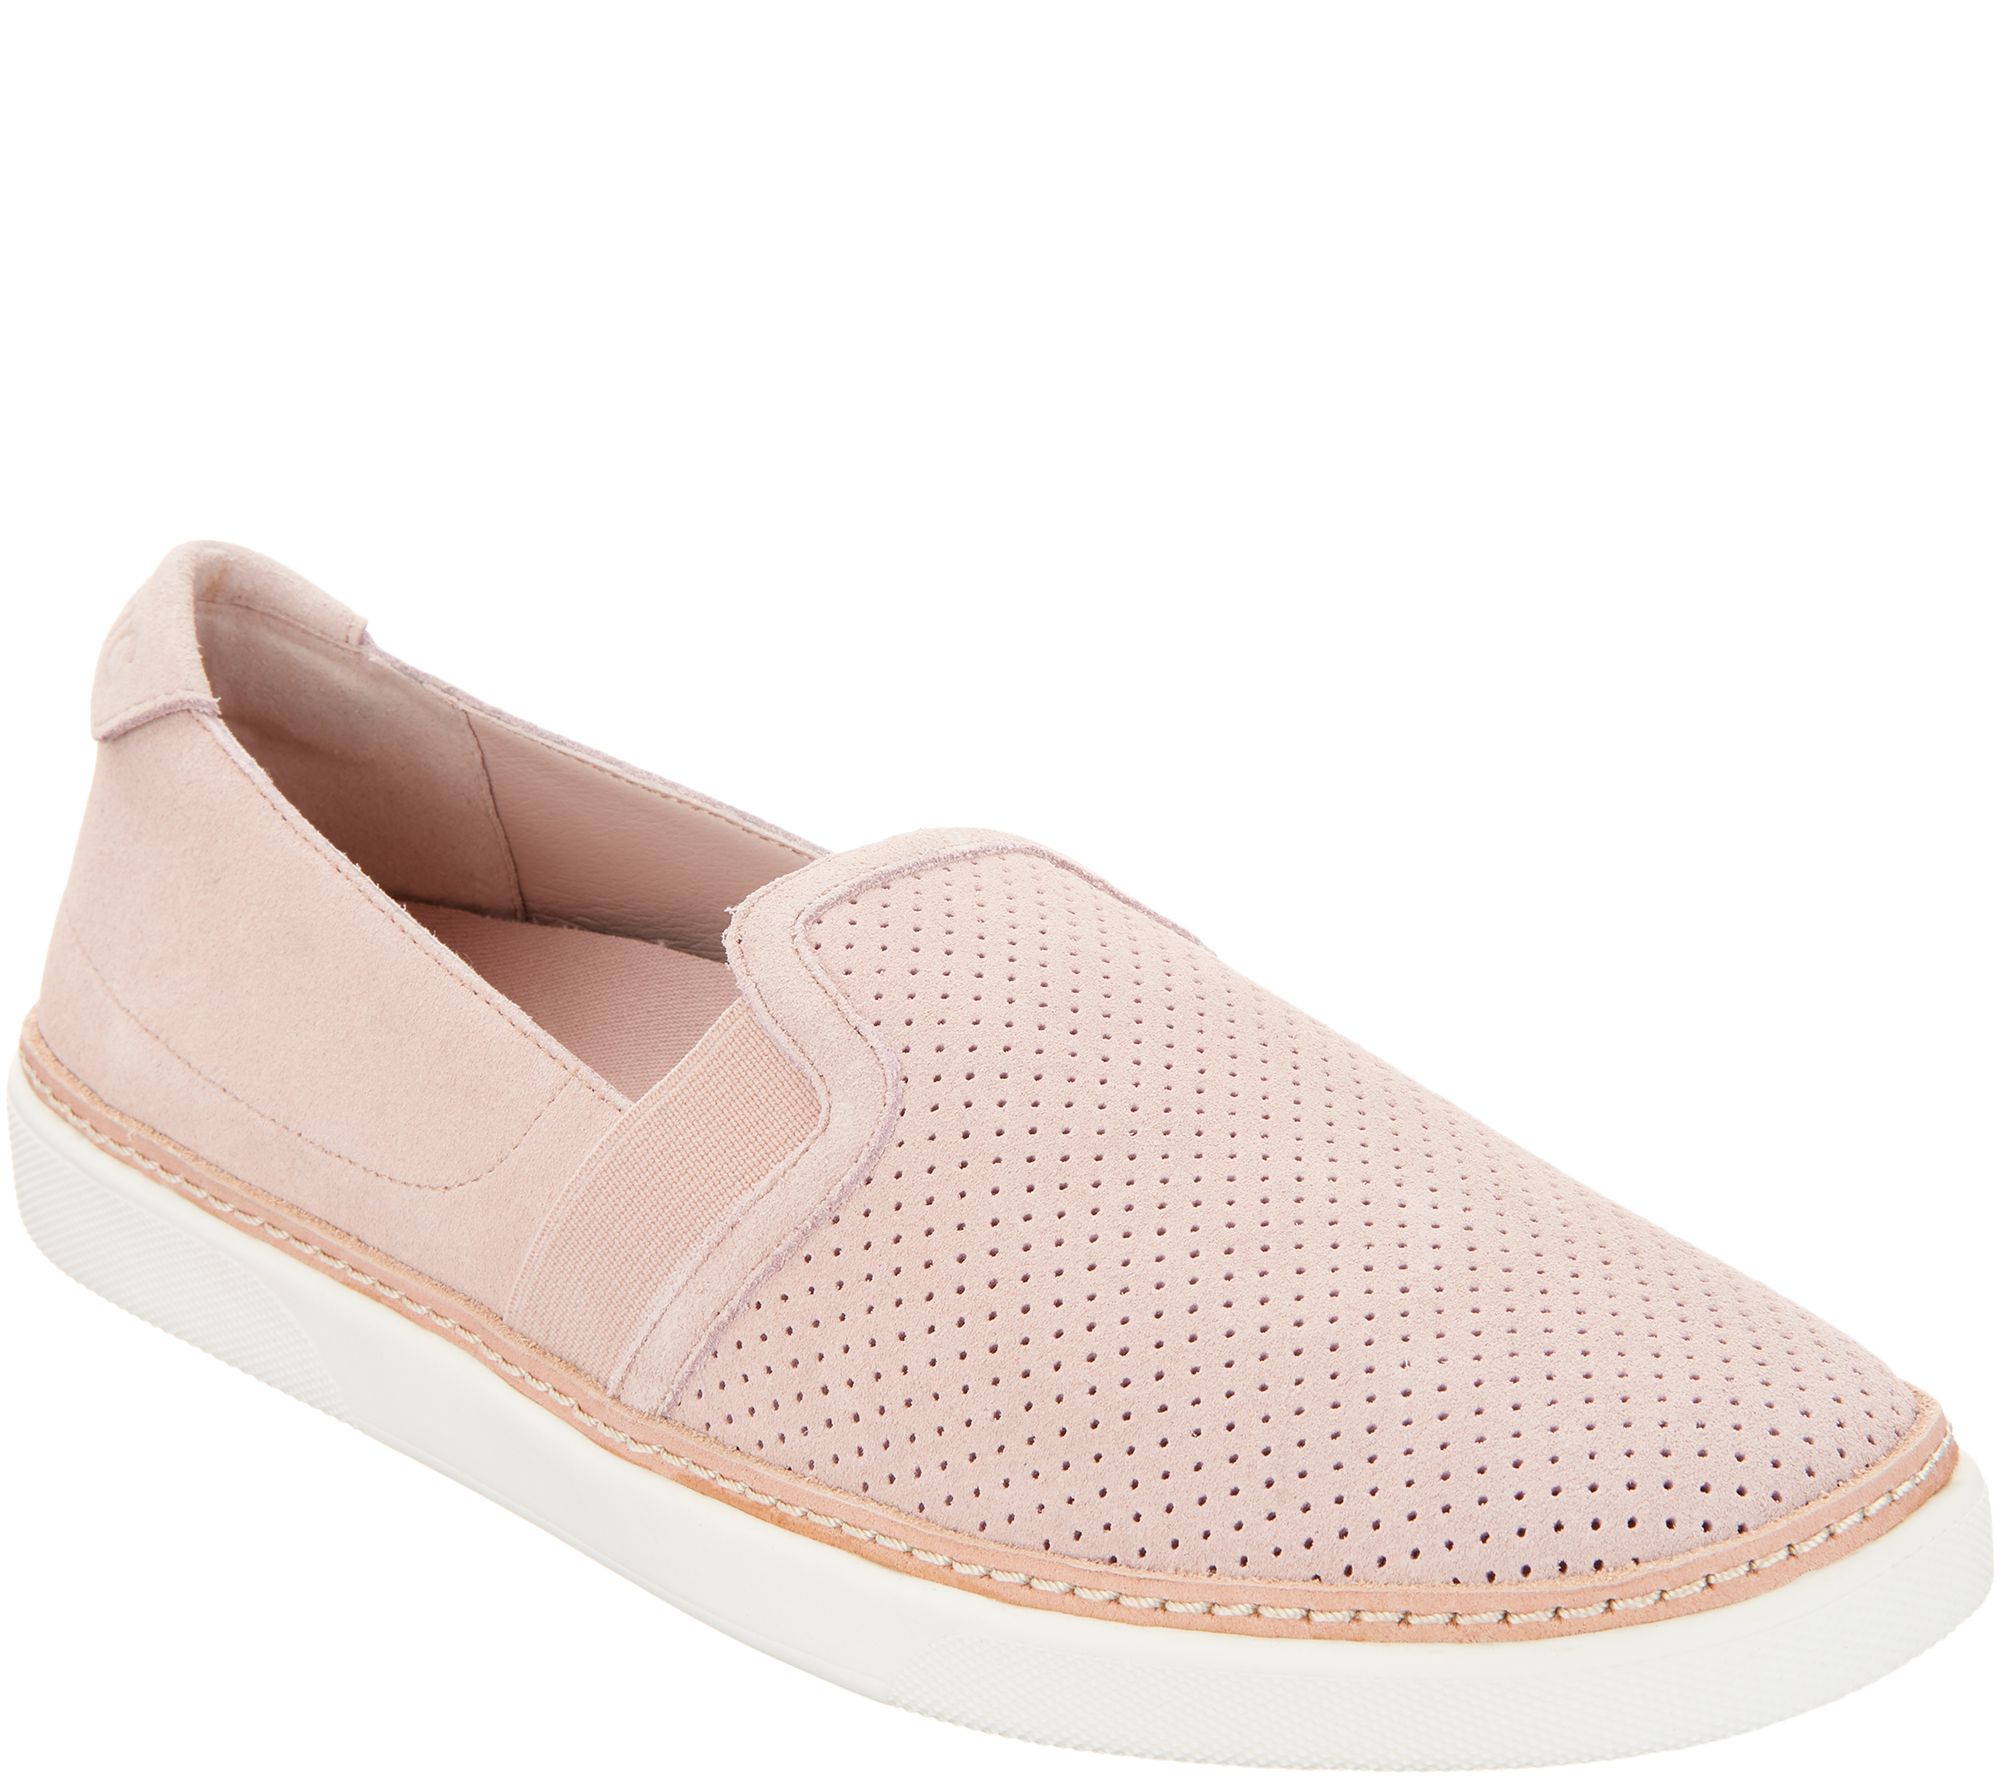 Vionic Perforated Suede Slip-Ons 